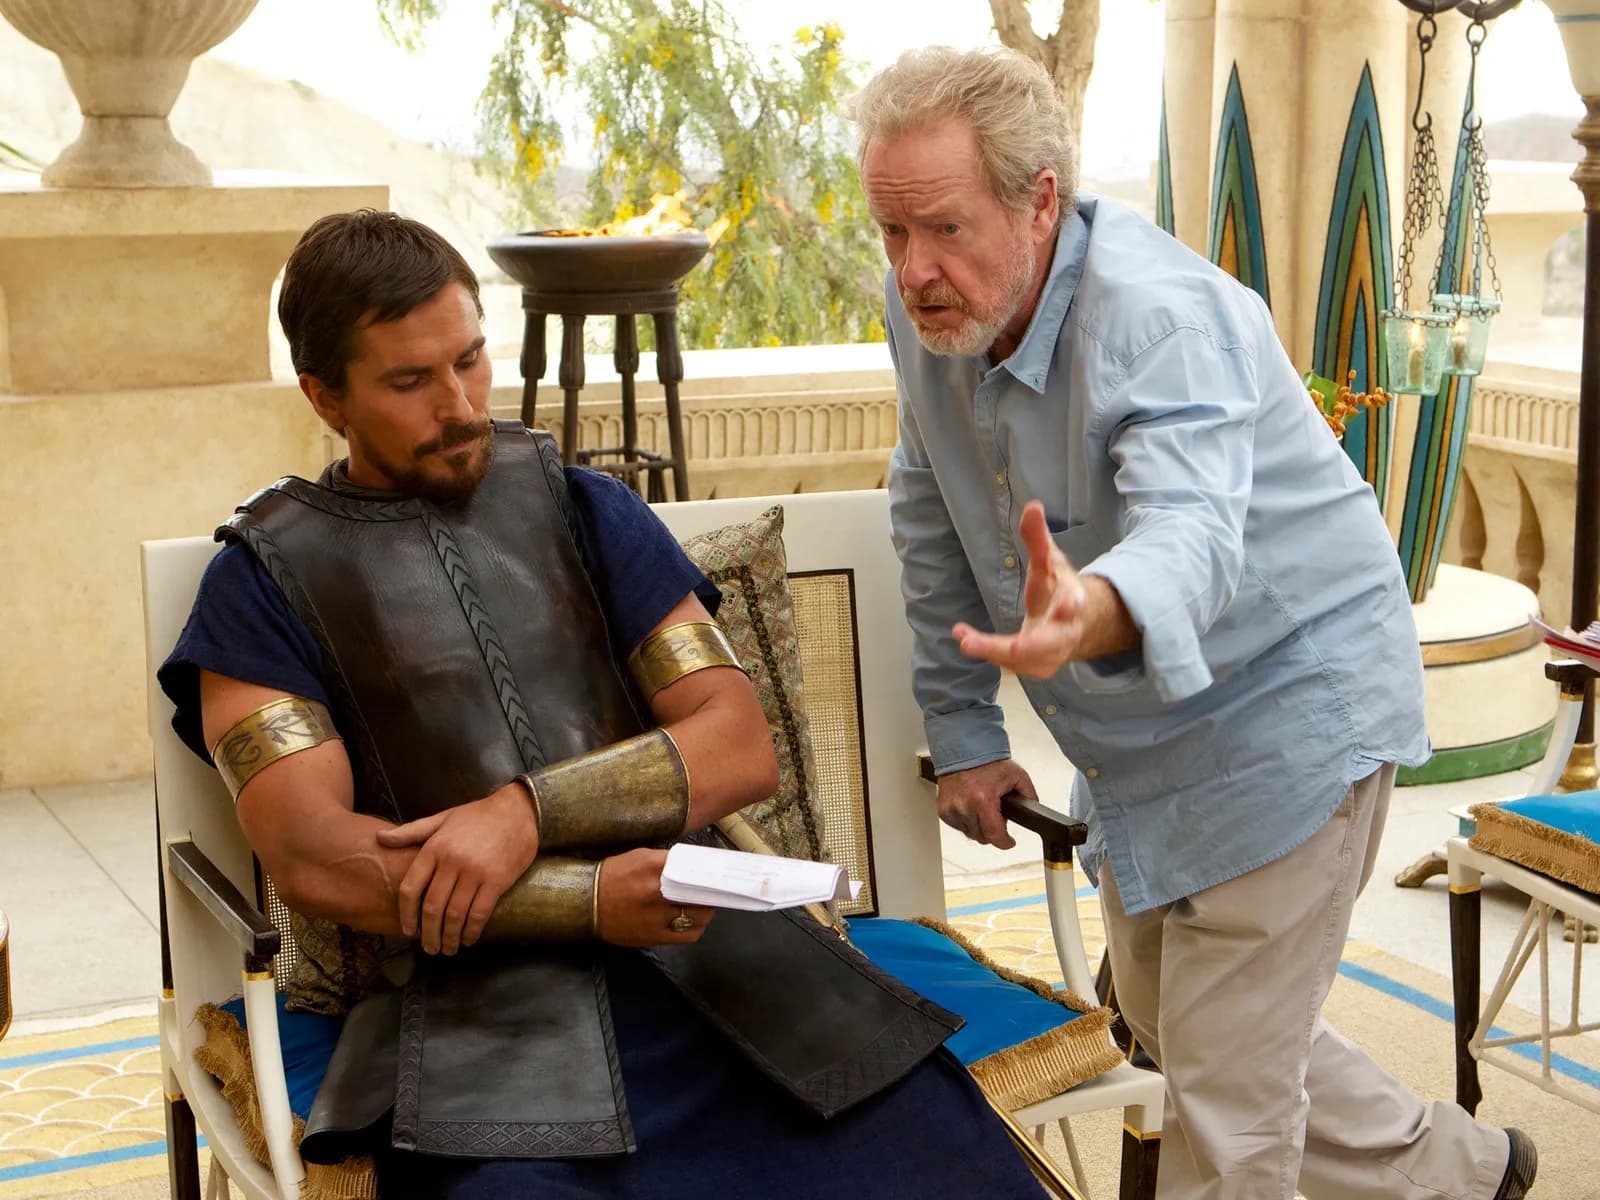 Ridley Scott sur le tournage d'Exodus - Gods and Kings. / © Kerry Brown